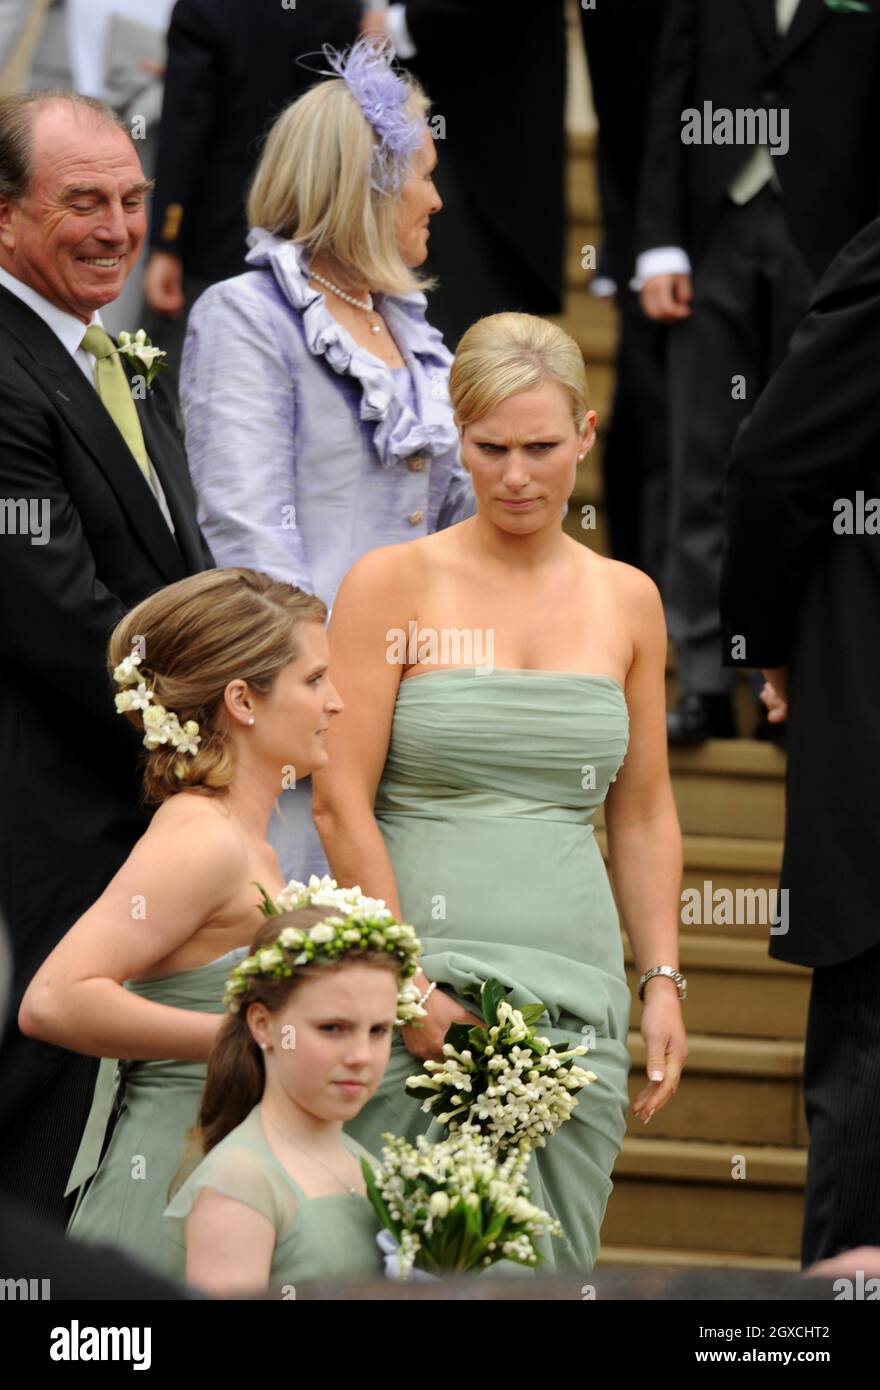 Zara Phillips leaves St. George's Chapel after the marriage ceremony of her brother Peter Phillips and Autumn Kelly at Windor Castle, Windsor. Stock Photo